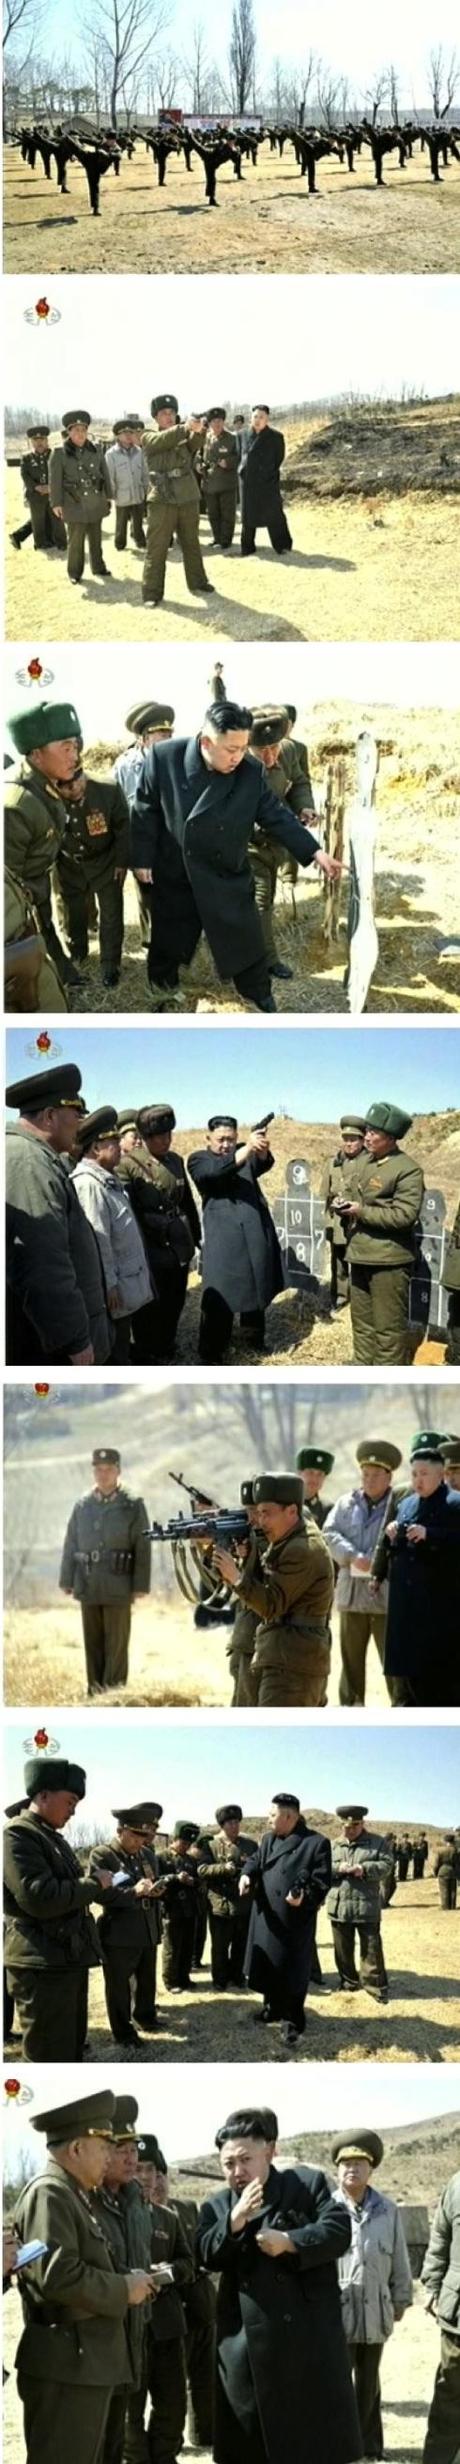 SOF personnel serving in the 2nd Battalion of KPA Unit #1973 participate in small arms drills under the command of Kim Jong Un during his field inspection of the battalion on 23 March 2013 (Photos: KCTV screengrabs)